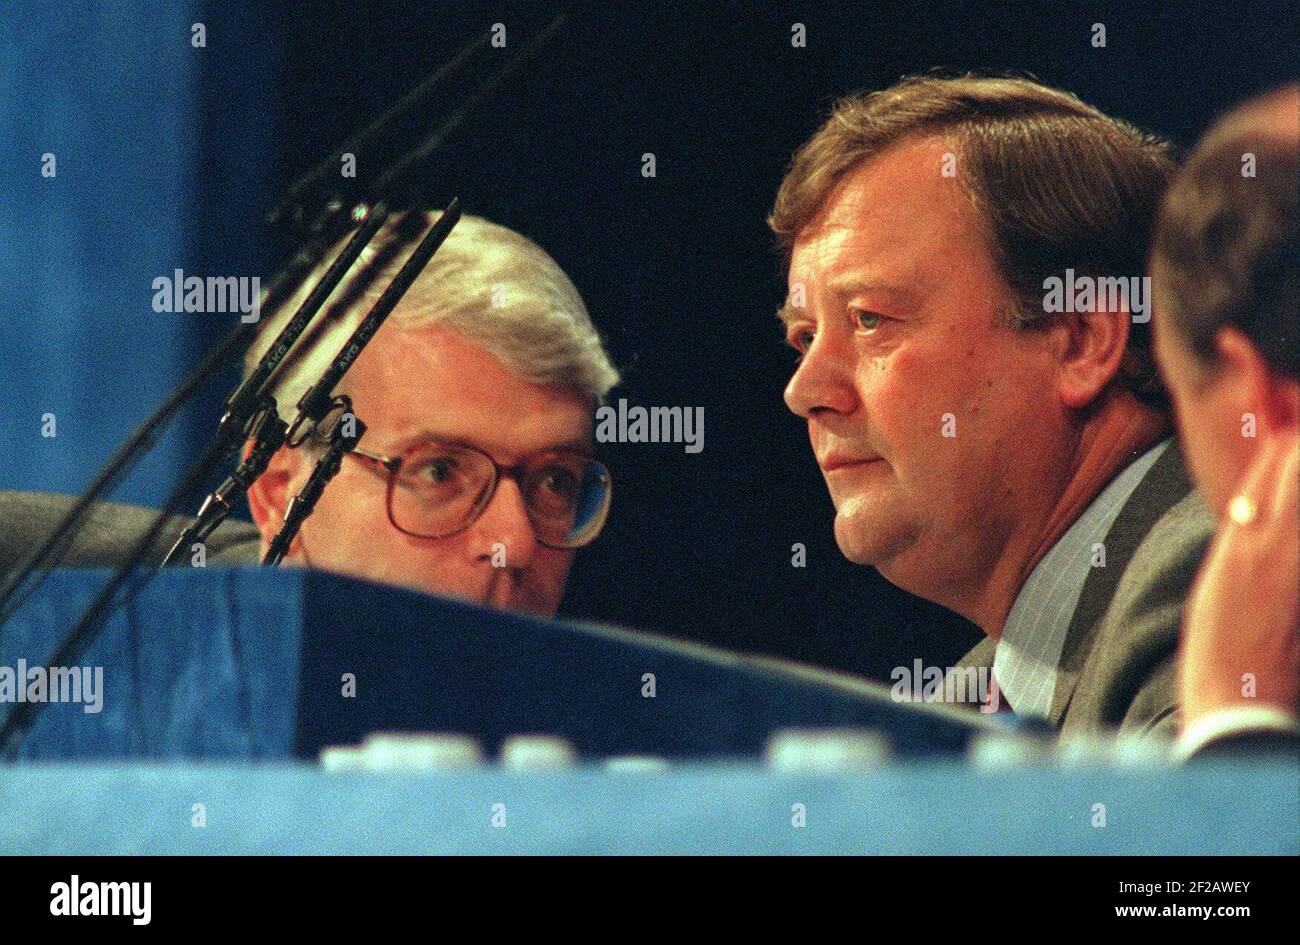 Kenneth Clarke and John Major share some private words at the 1995 Tory Party Conference    Dbase Stock Photo